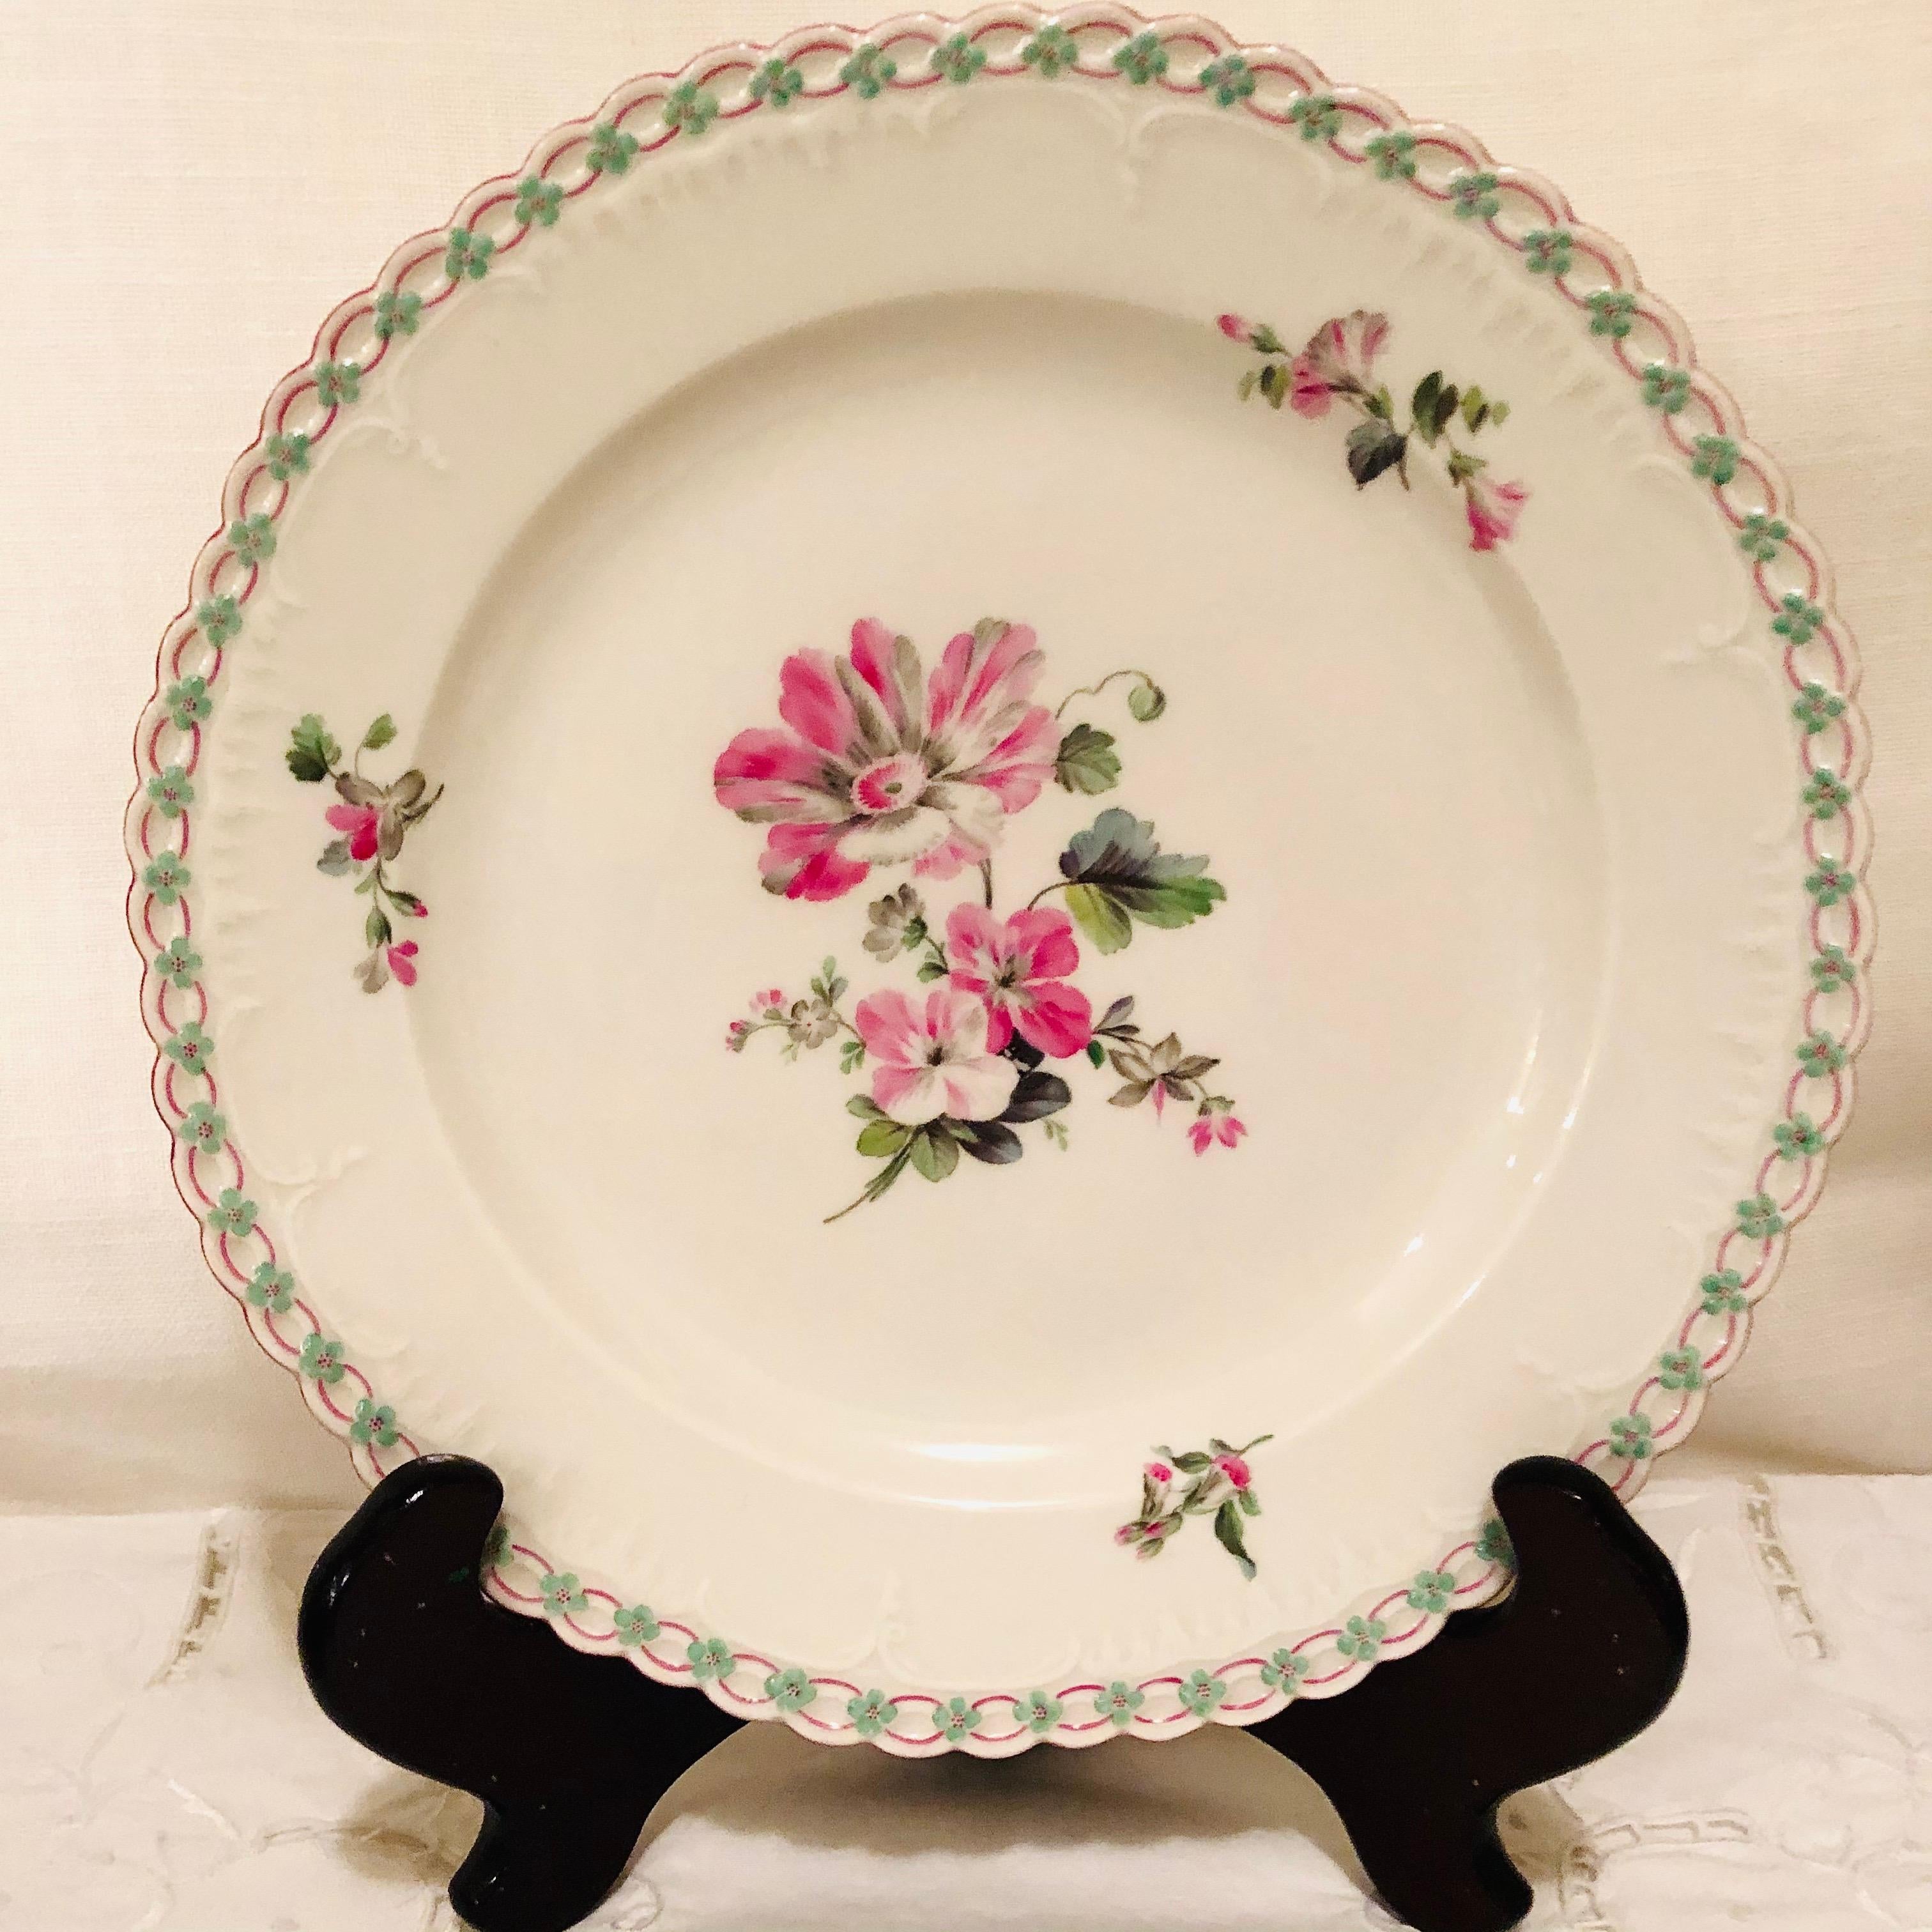 Late 19th Century Set of 13 KPM Dinner Plates Each Painted Differently With Raised Forget Me Nots